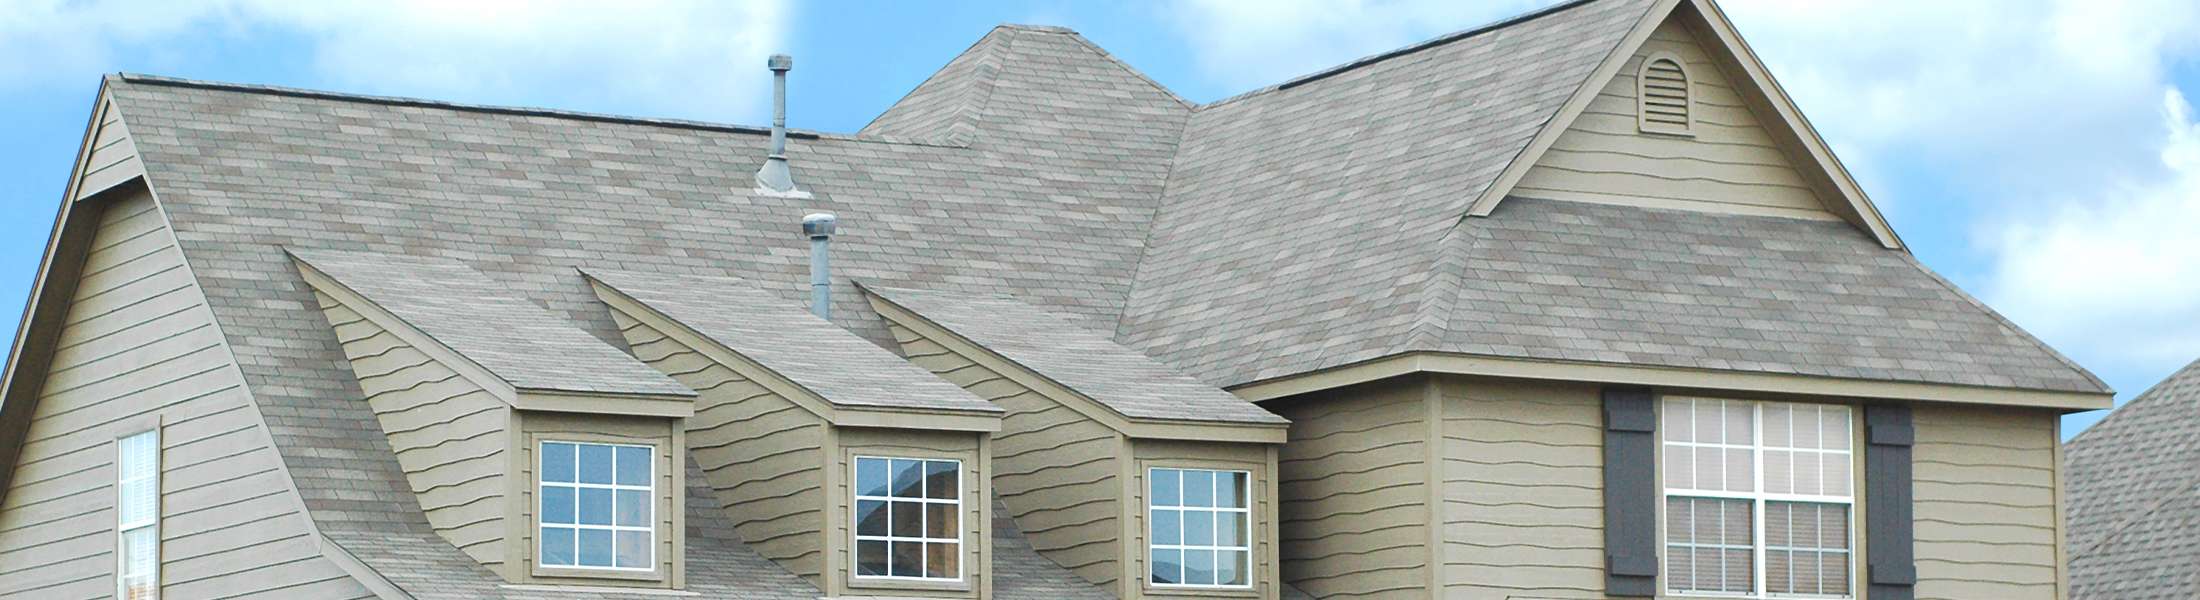 Janiec Roofing Images